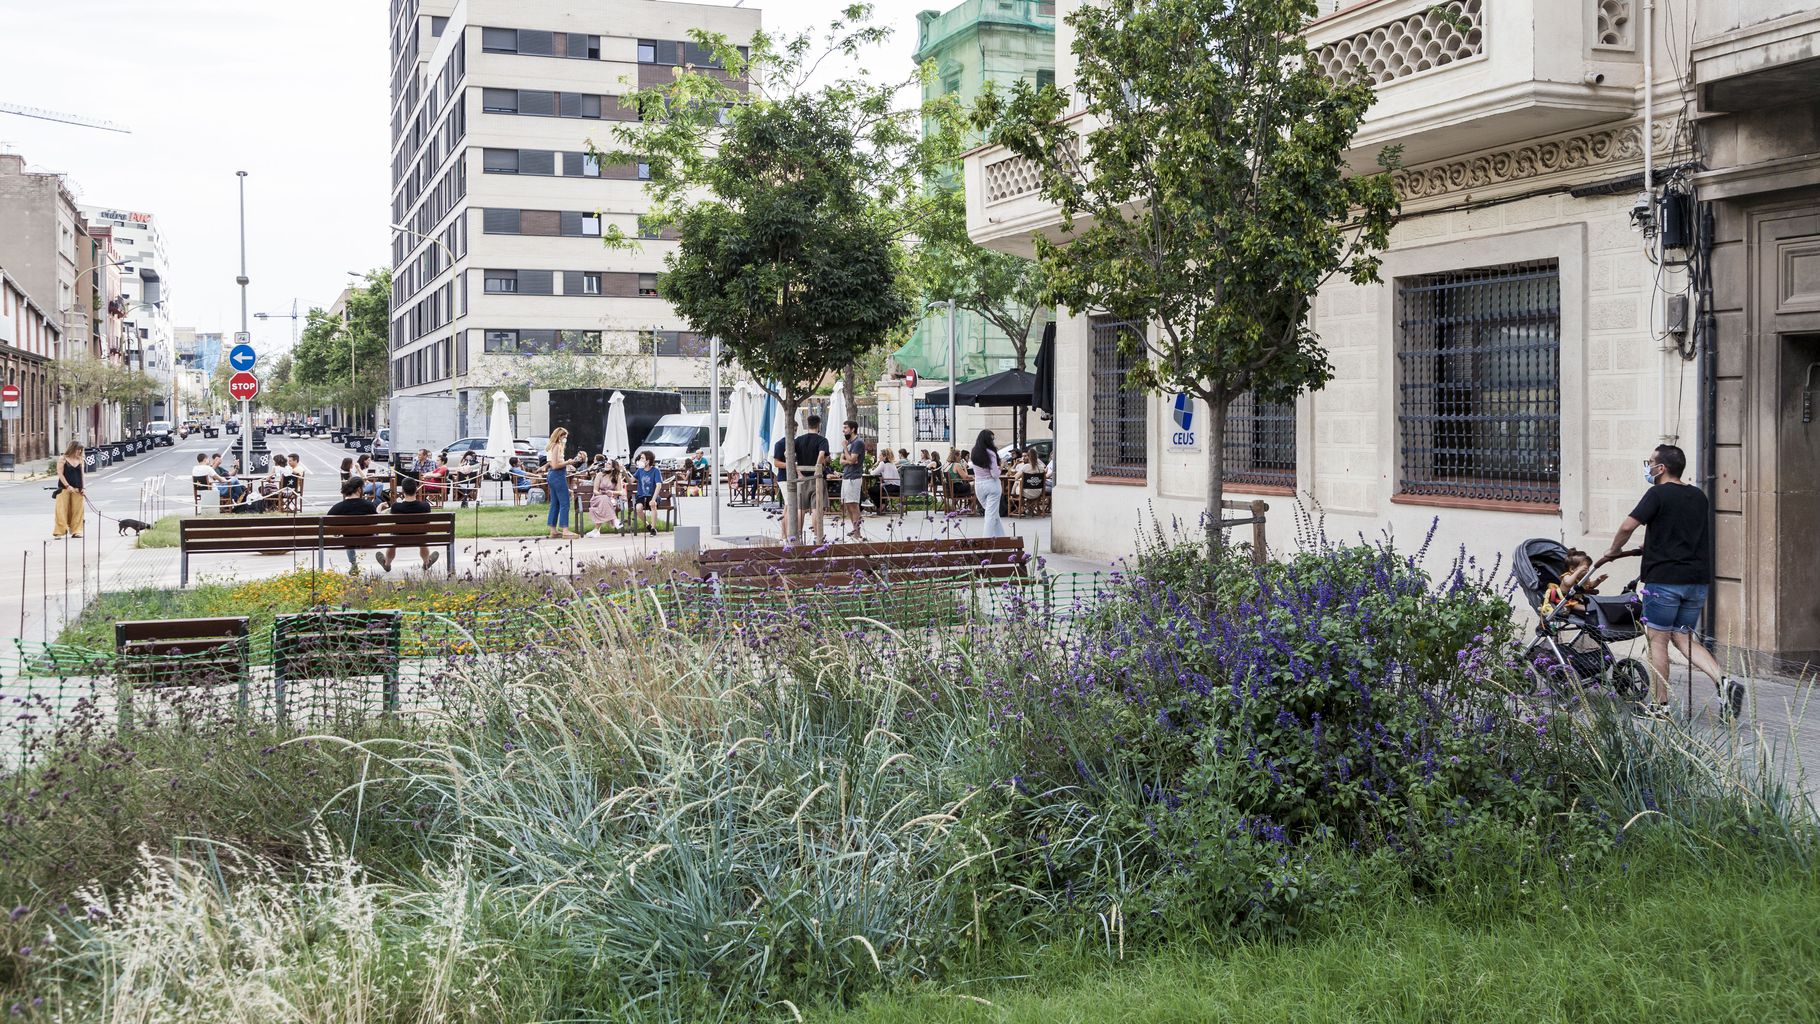 A garden and small trees in a cityscape where people are walking and sitting on benches